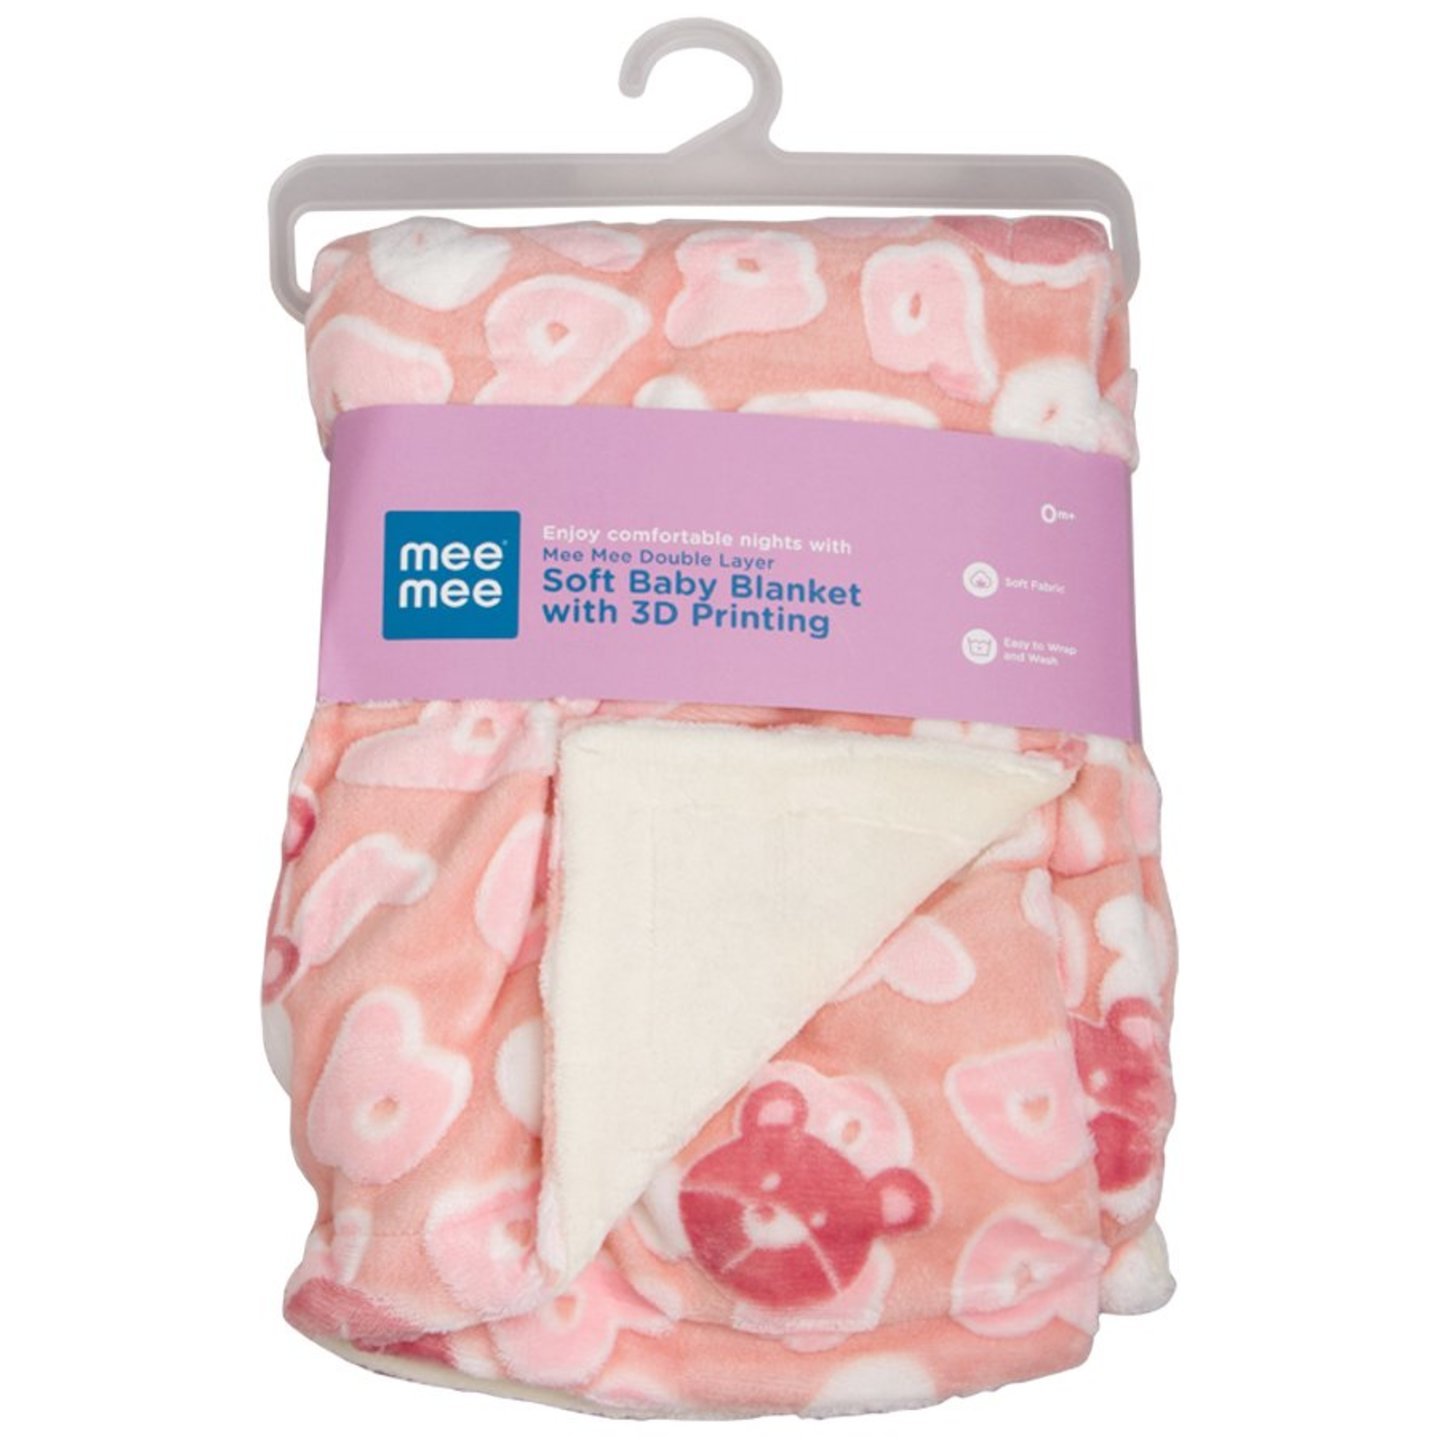 Mee Mee Double Layered Soft Baby Blanket